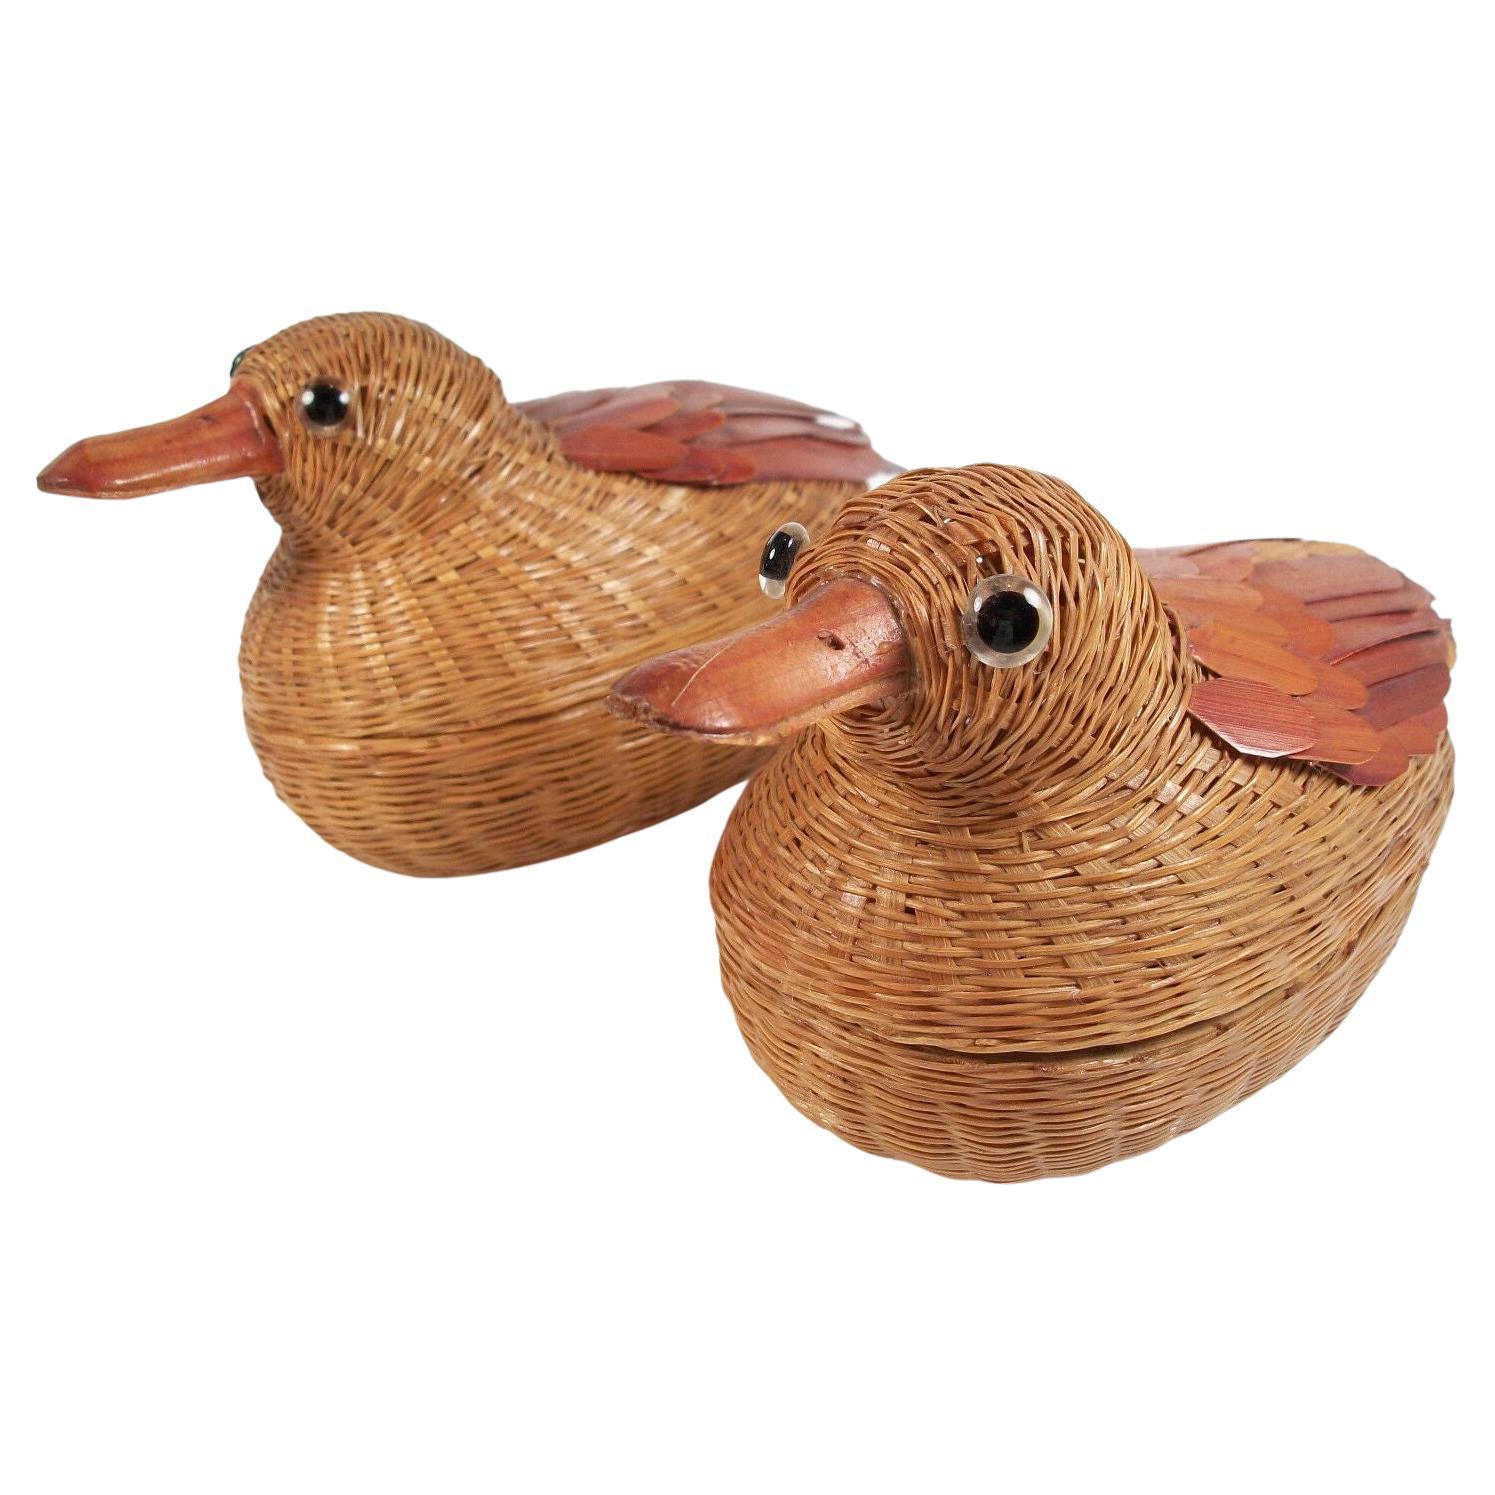 Pair of Vintage Bird Form Lidded Baskets - Finely Woven - Late 20th Century